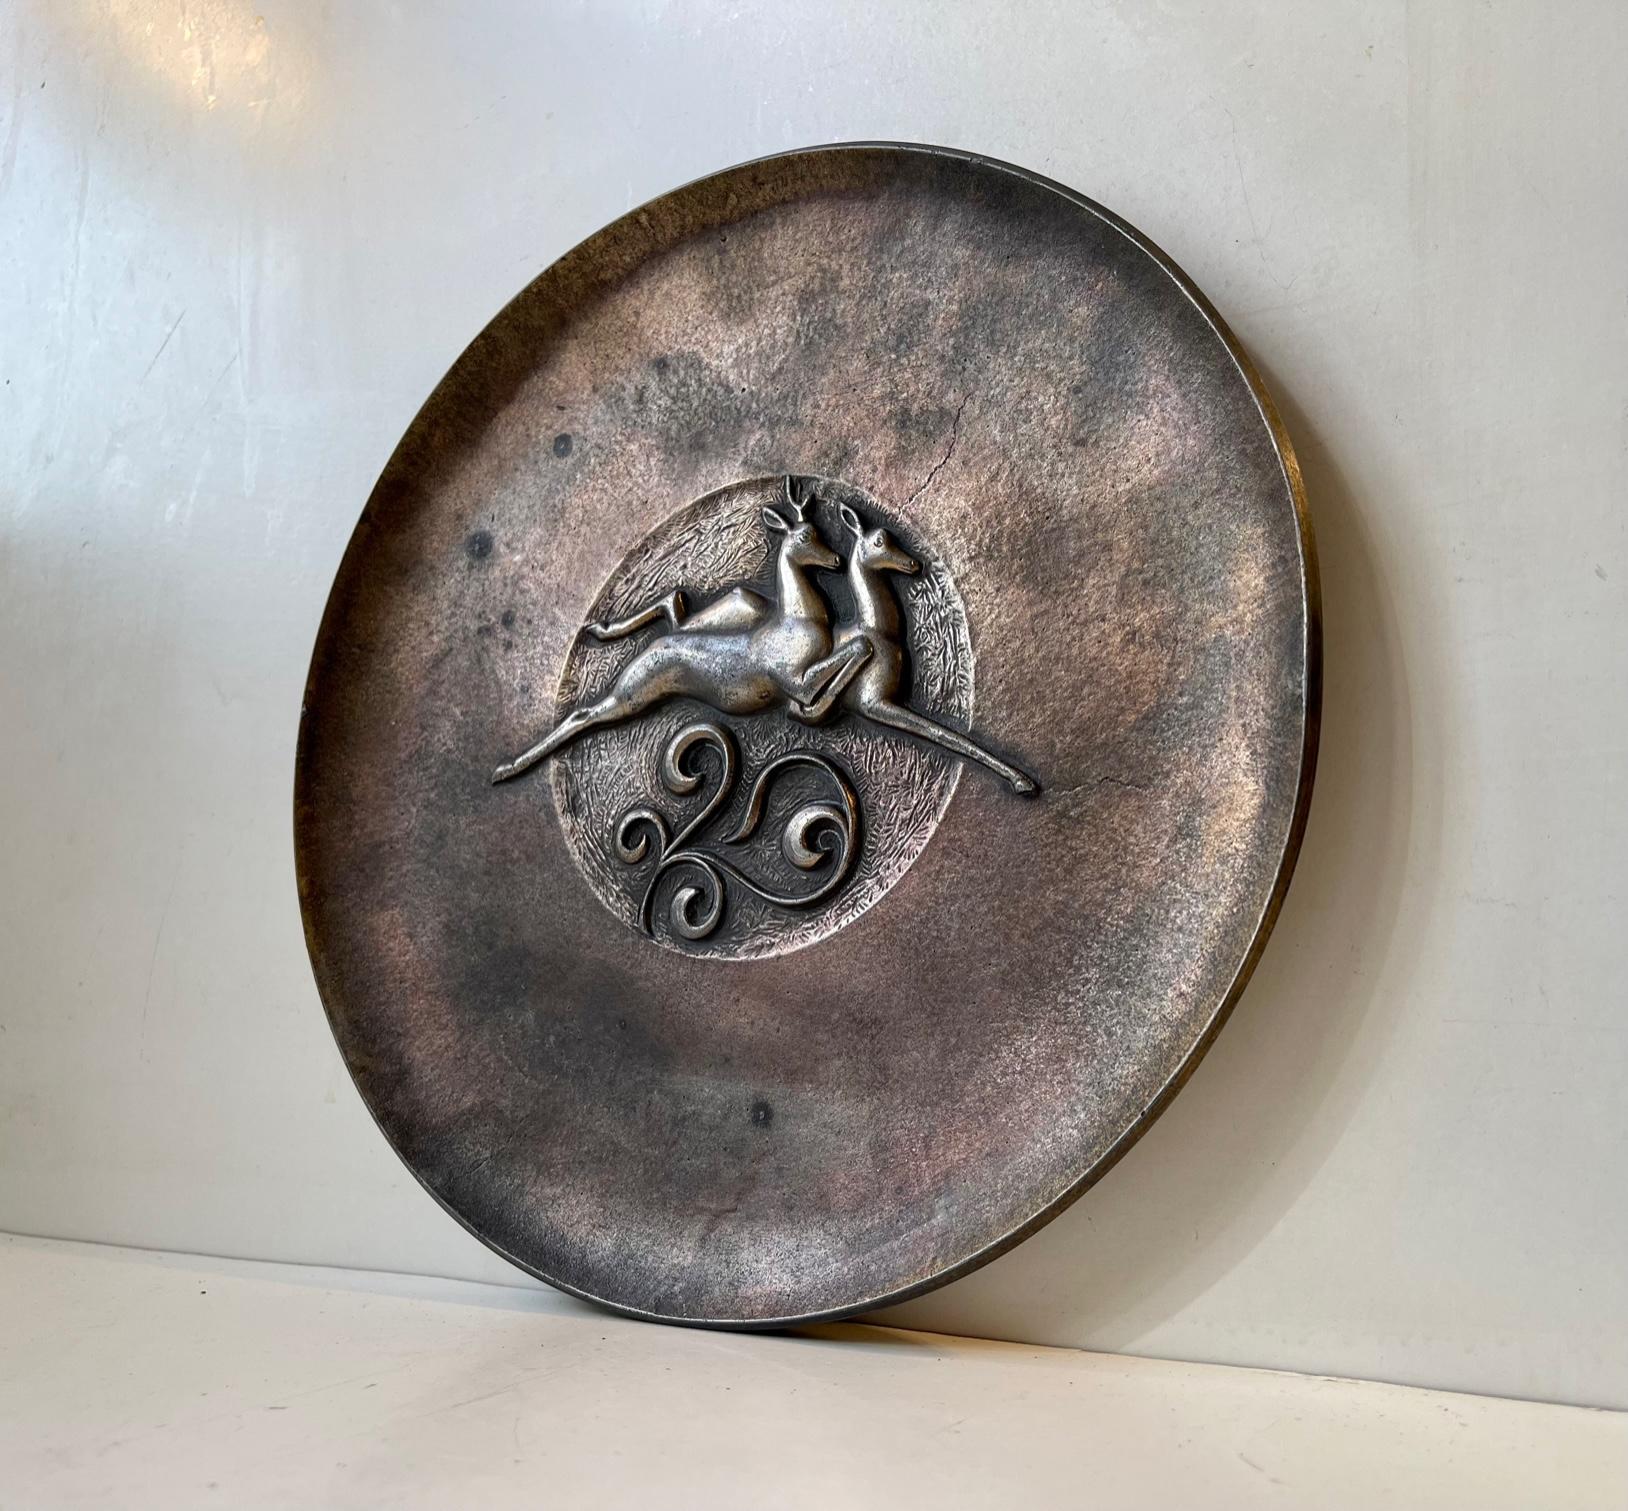 A stylish bronze dish, plate or flat centerpiece bowl. Beautiful natural silvery-copper patina. Its has a center motif of antelopes in relief. Its European made probably Scandinavia, France or German. Signed indistinguishable to its backside.